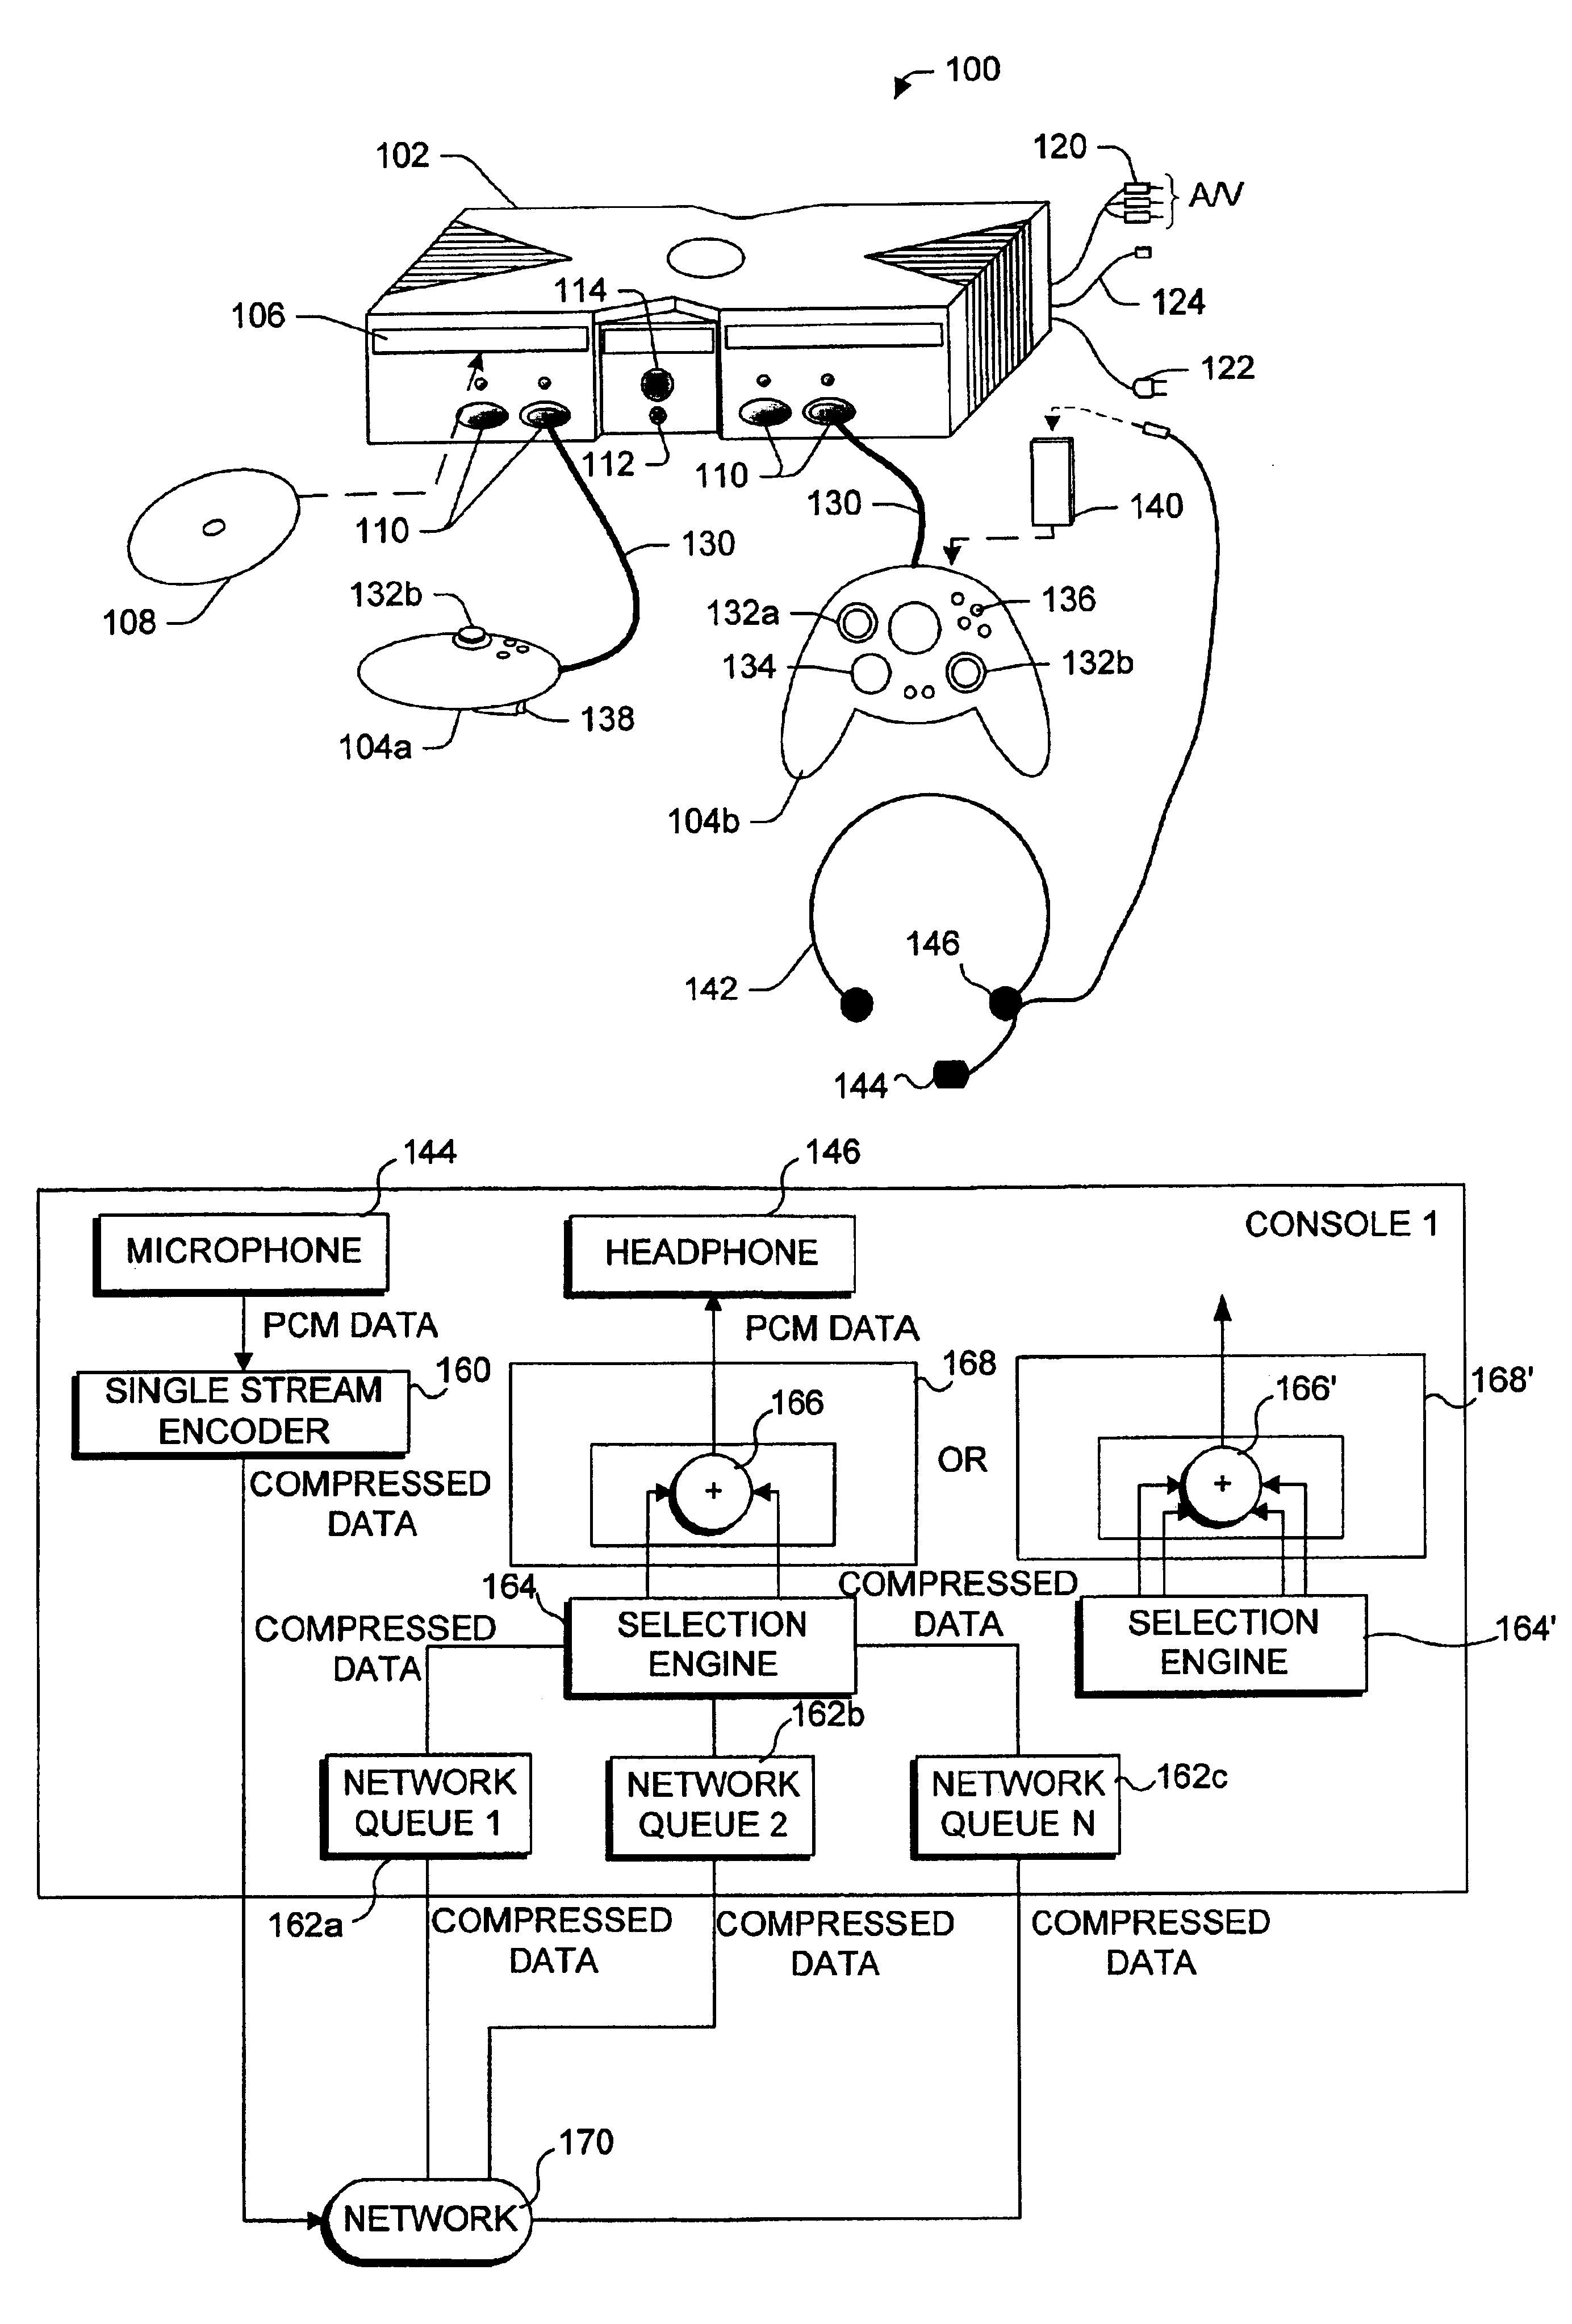 Use of multiple player real-time voice communications on a gaming device